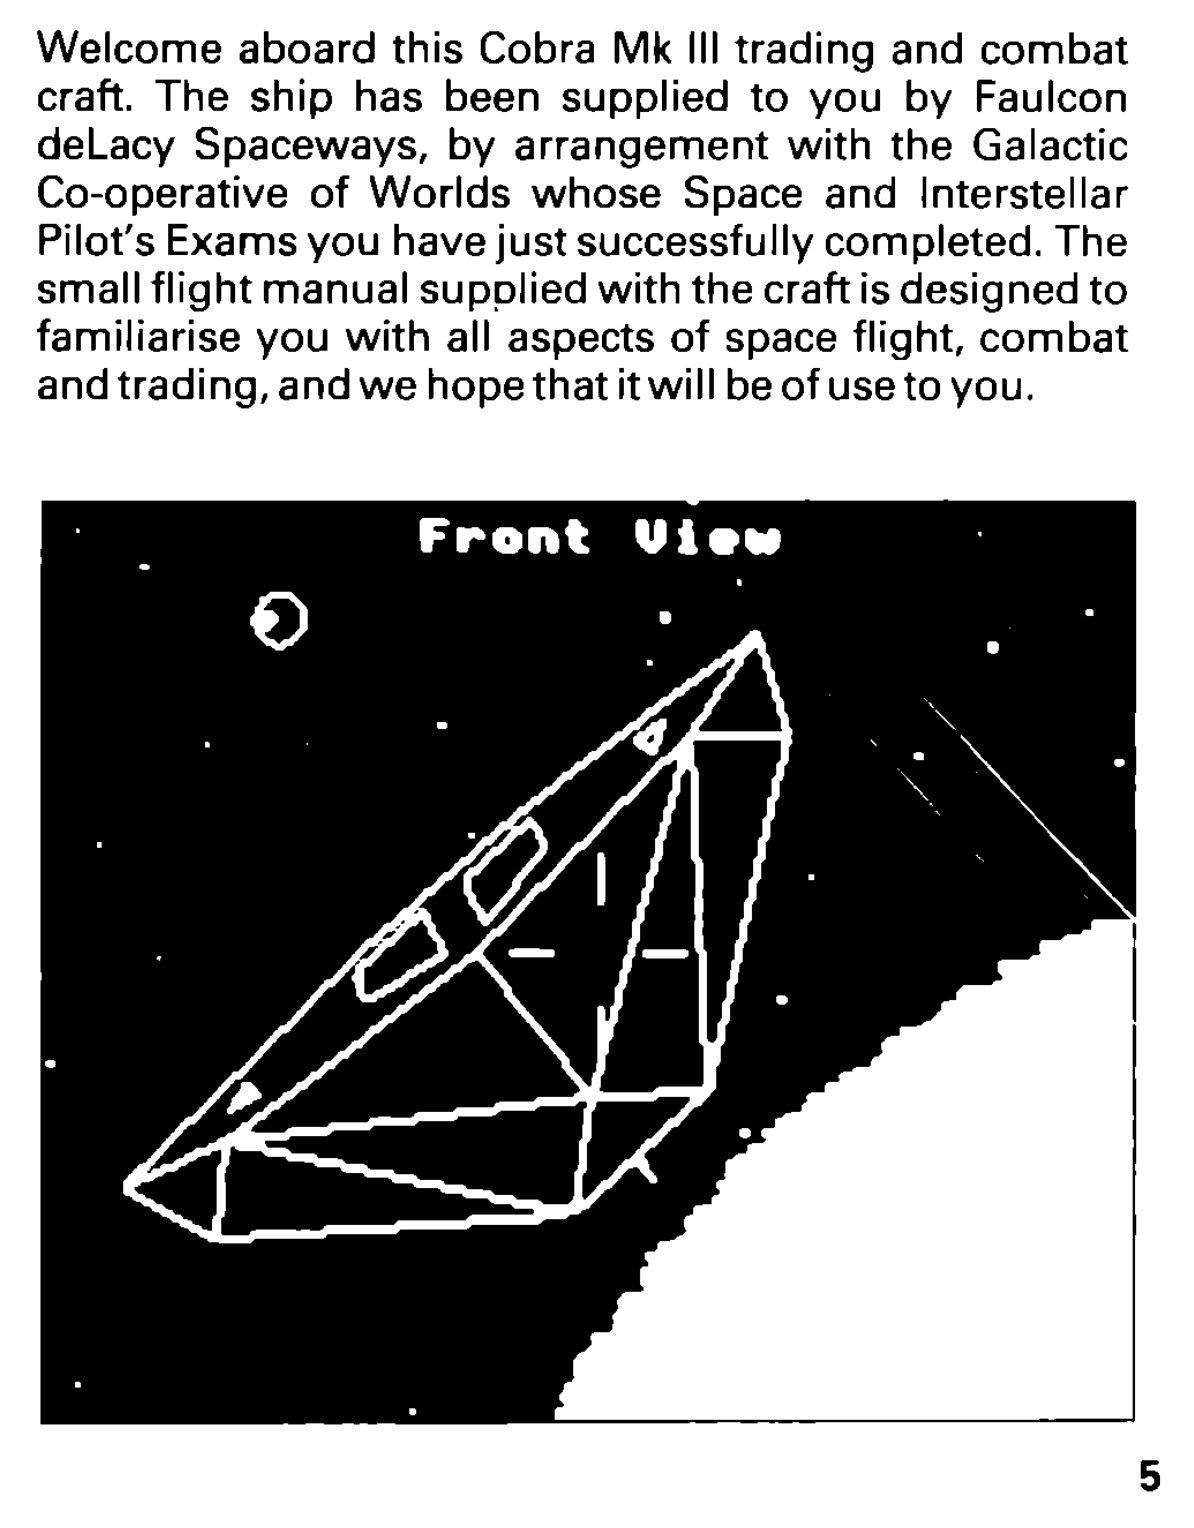 The screenshot from page 5 of the manual